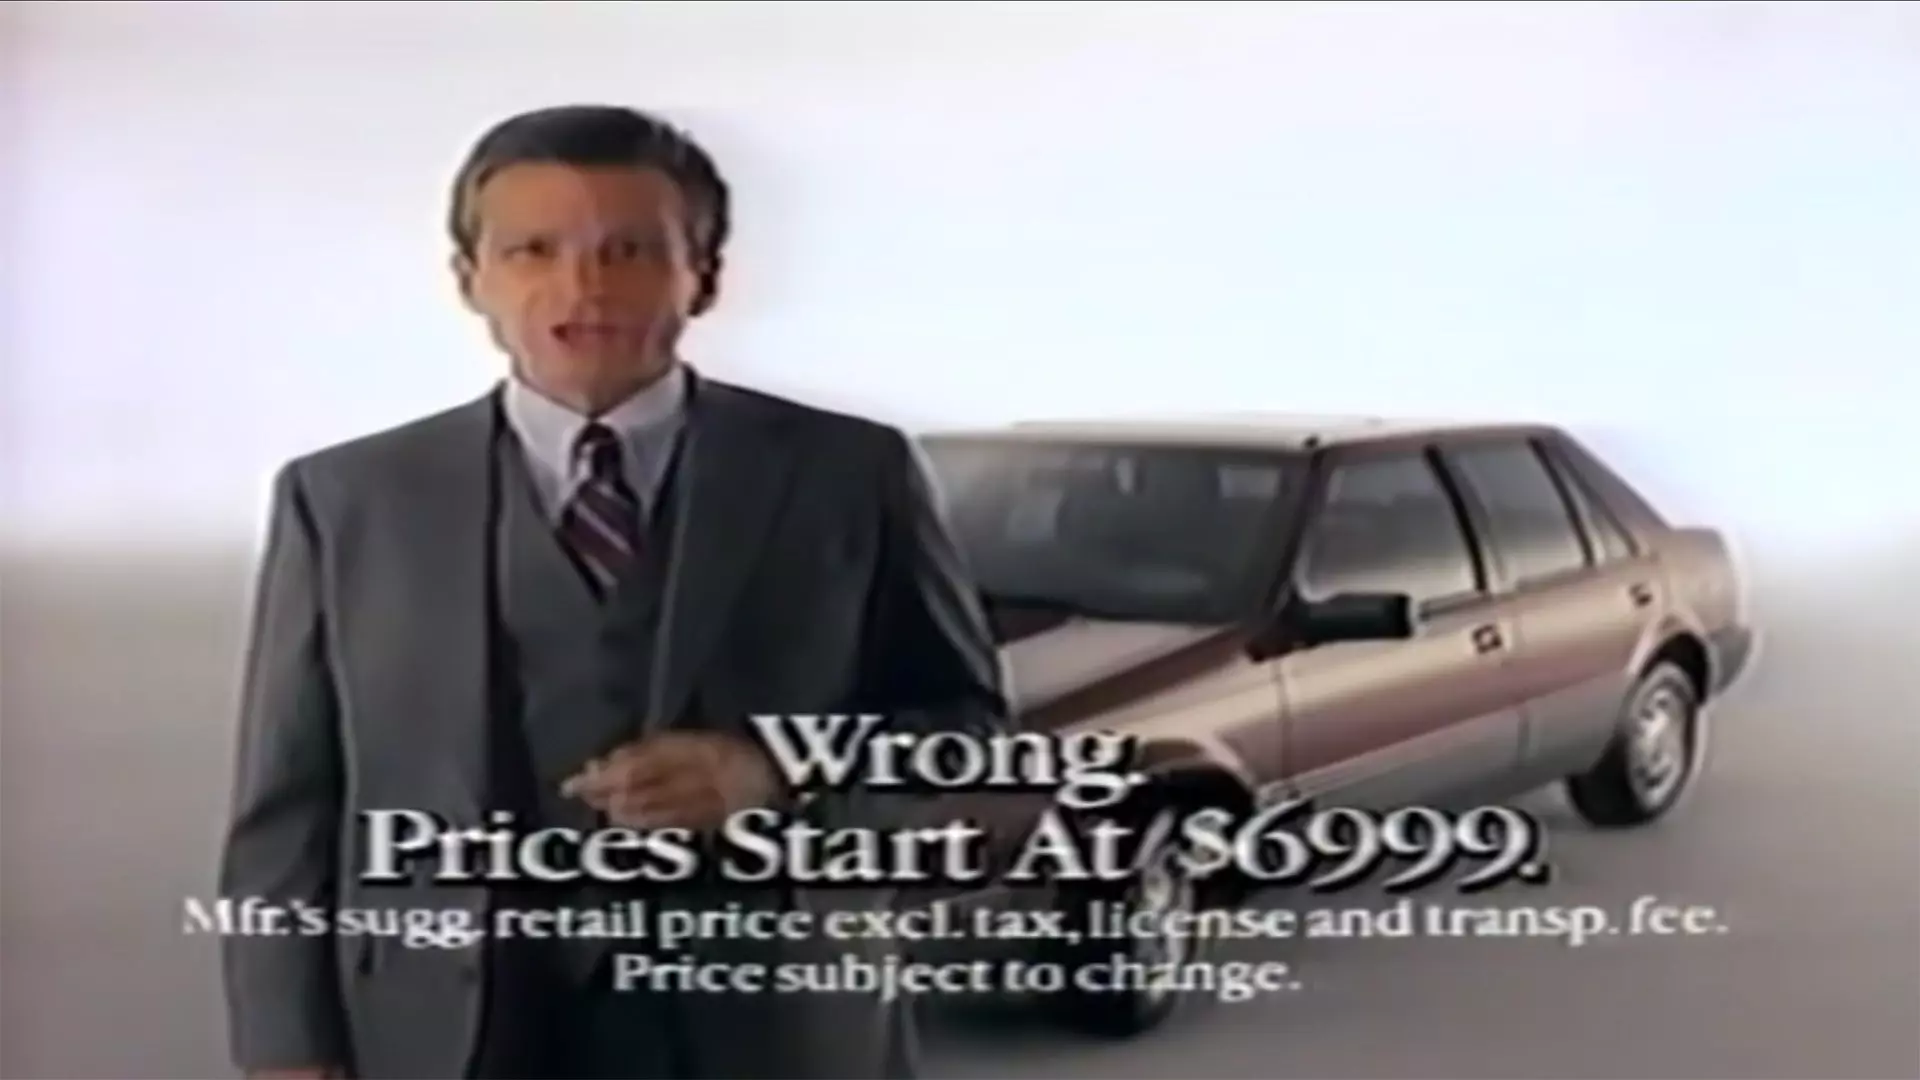 Remembering Joe Isuzu: A Truly Bizarre Character Invented To Sell Cars With Obvious Lies | Autance